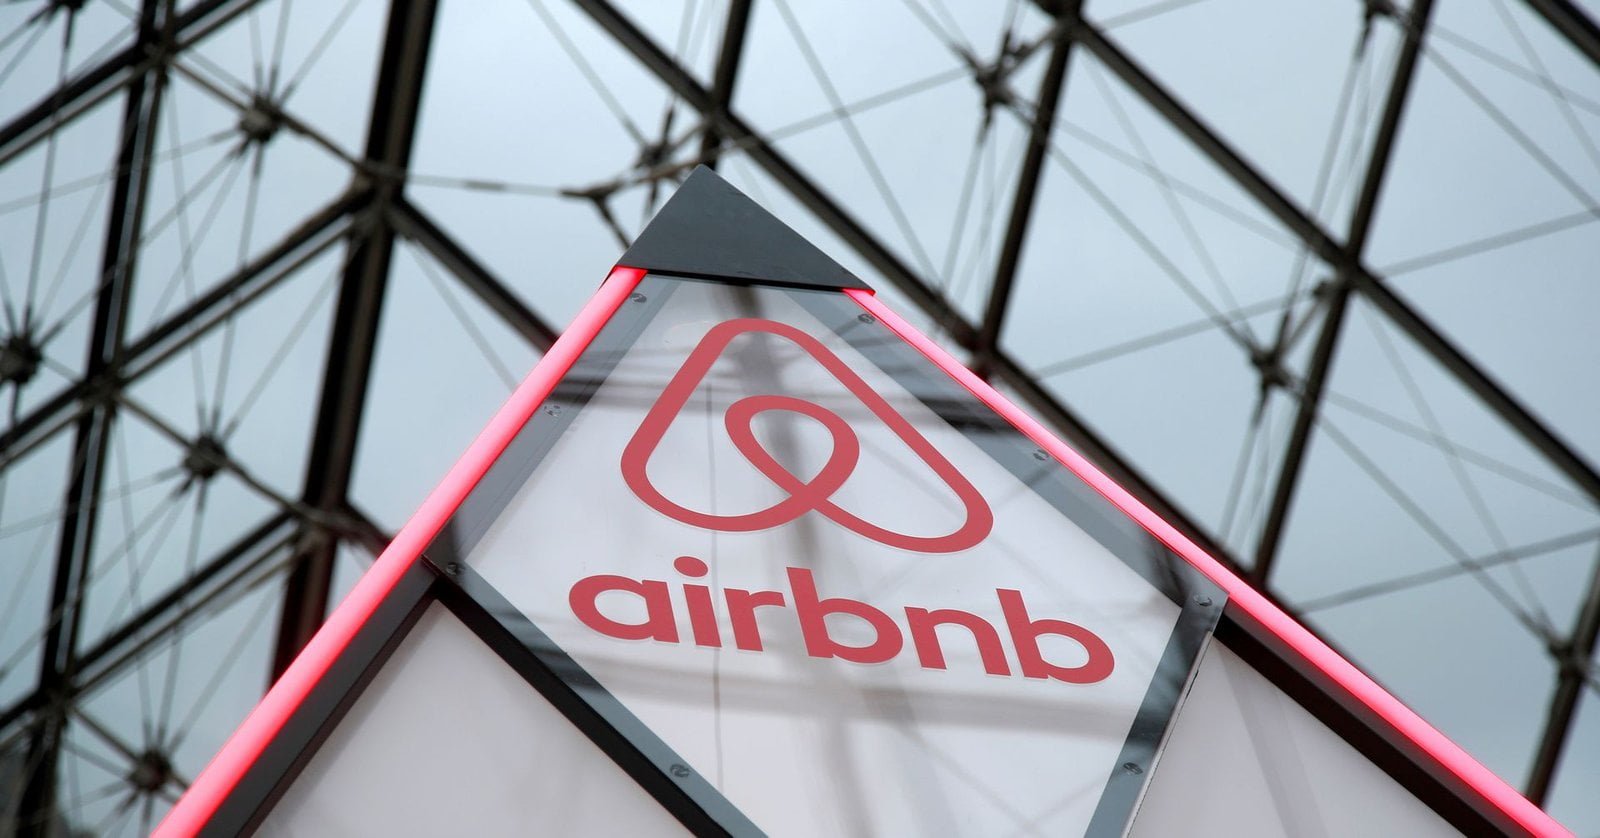 airbnb-looking-to-support-crypto-while-focusing-on-free-housing